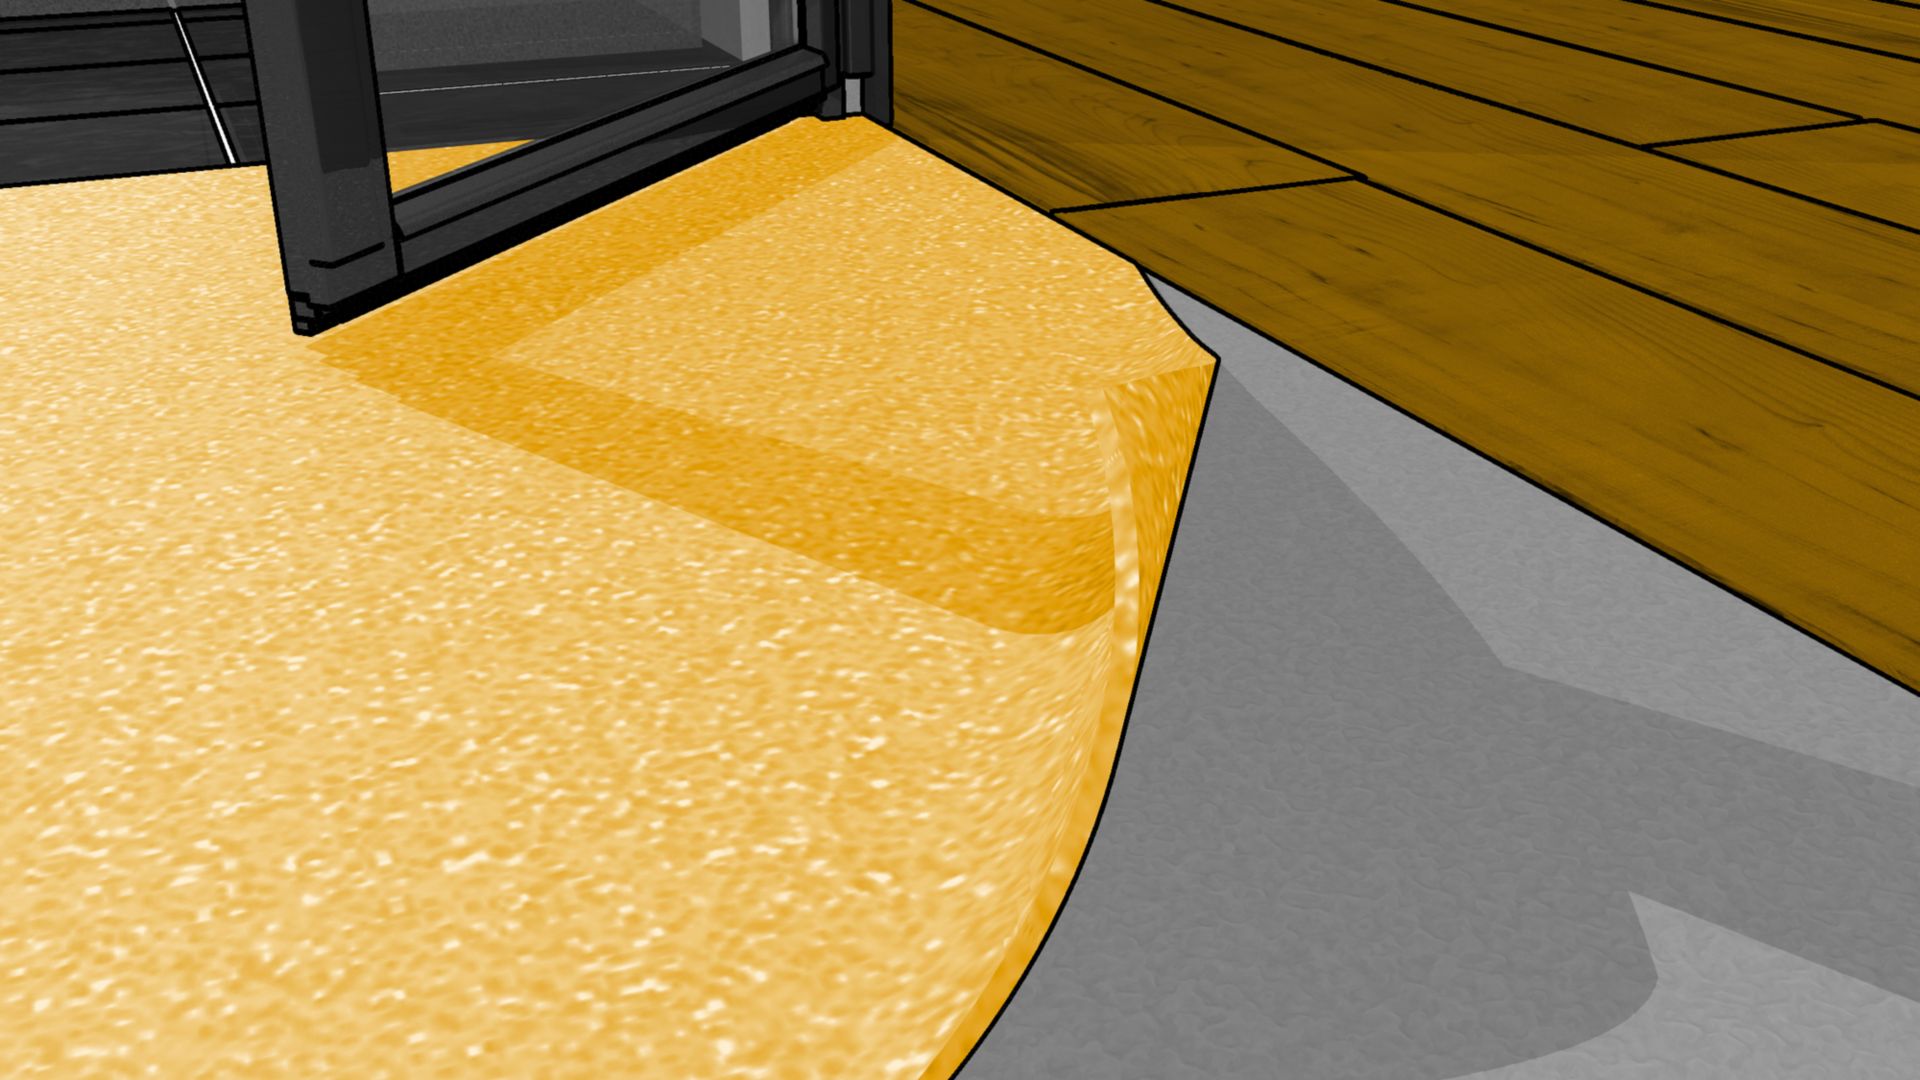 Illustration of interior kitchen floor adhesive application during offsite construction